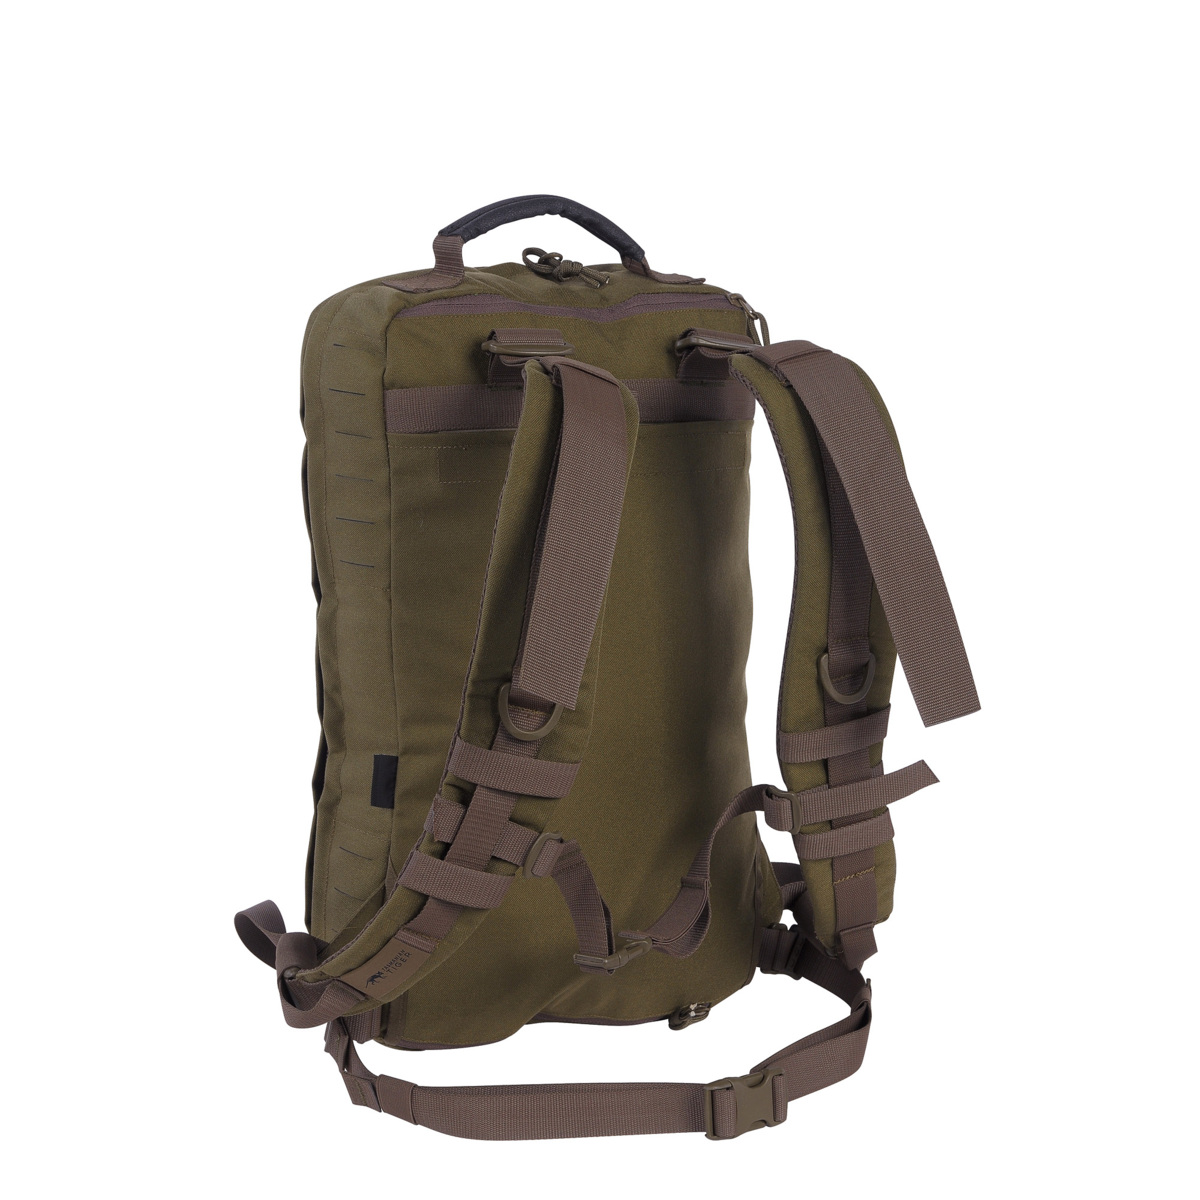 TT Medic Assault Pack MKII - First Aid Backpack 15L